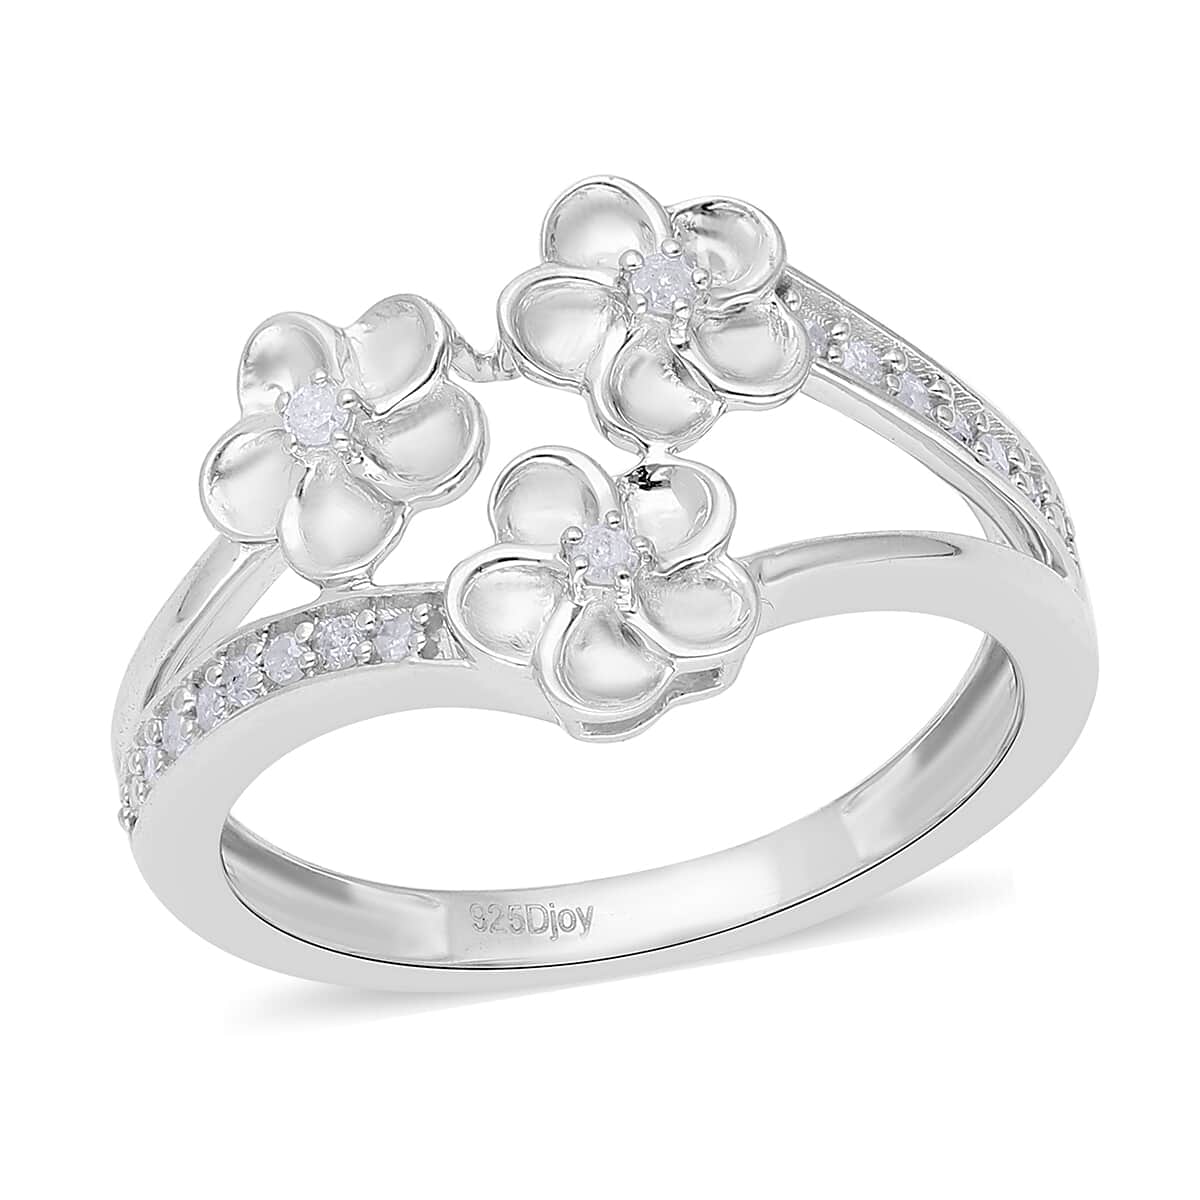 Buy Diamond Floral Ring in Platinum Over Sterling Silver (Size 6.0 ...